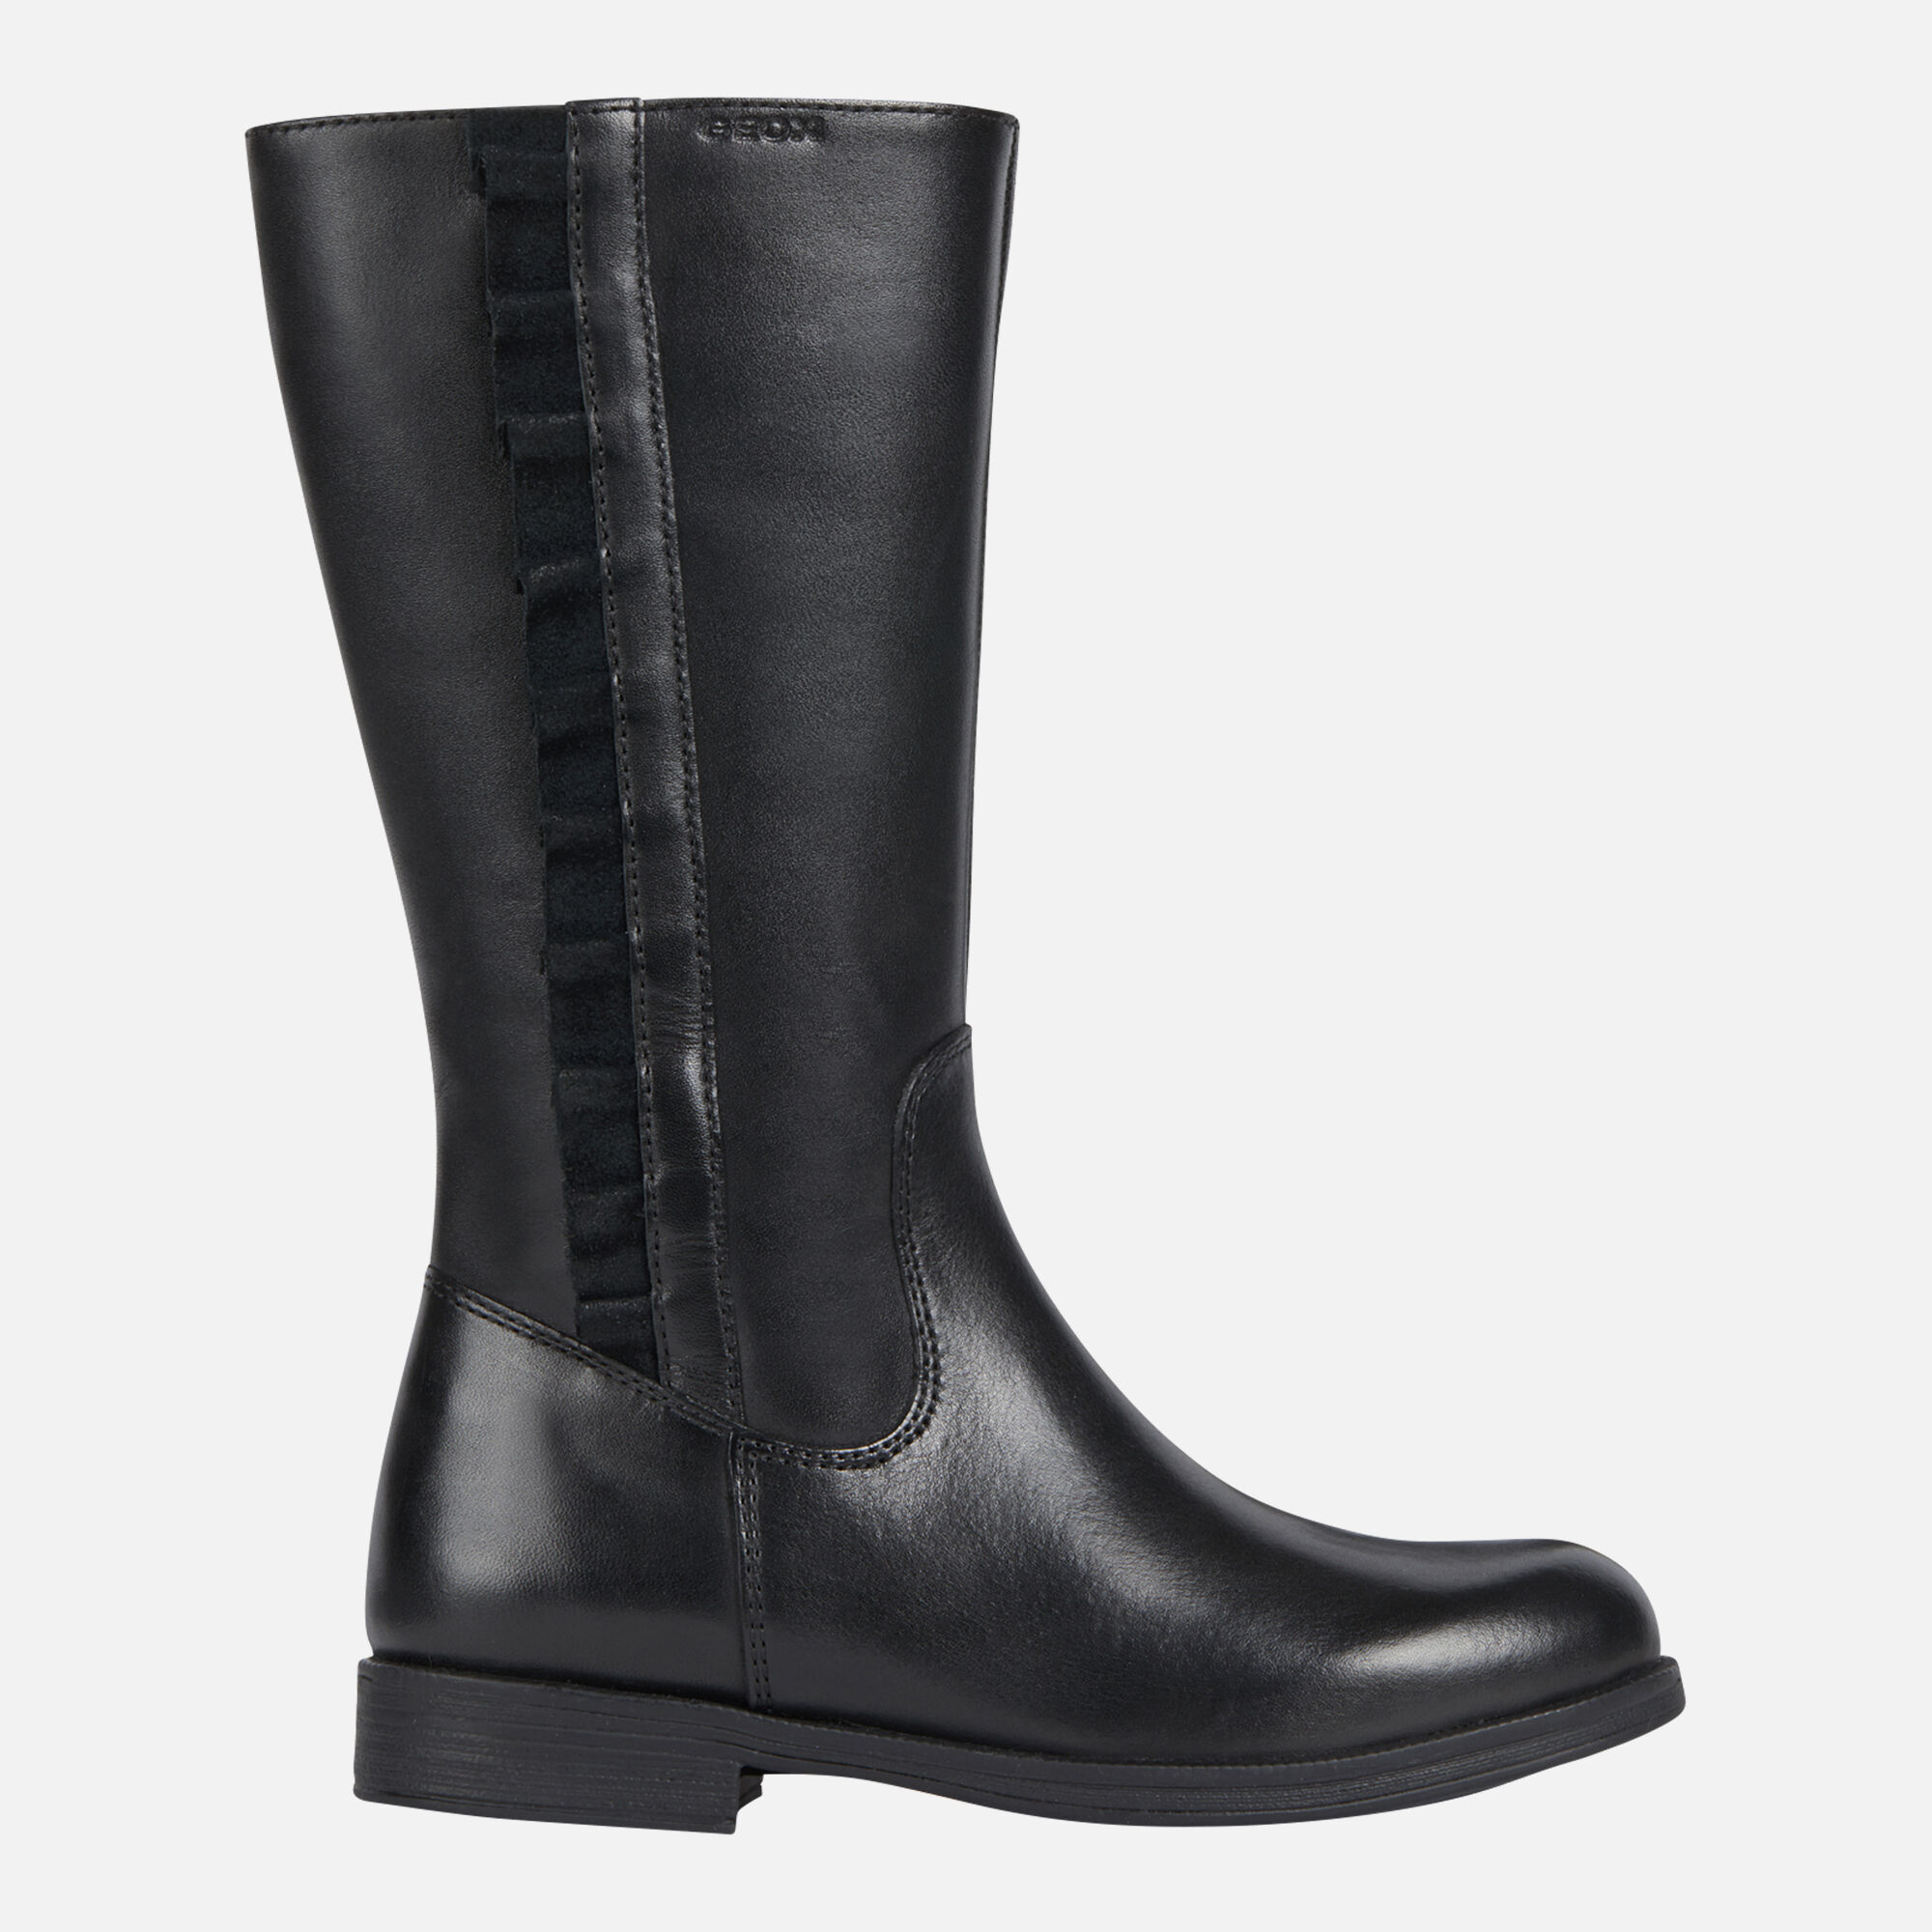 AGATA GIRL - BOOTS from girls | Geox